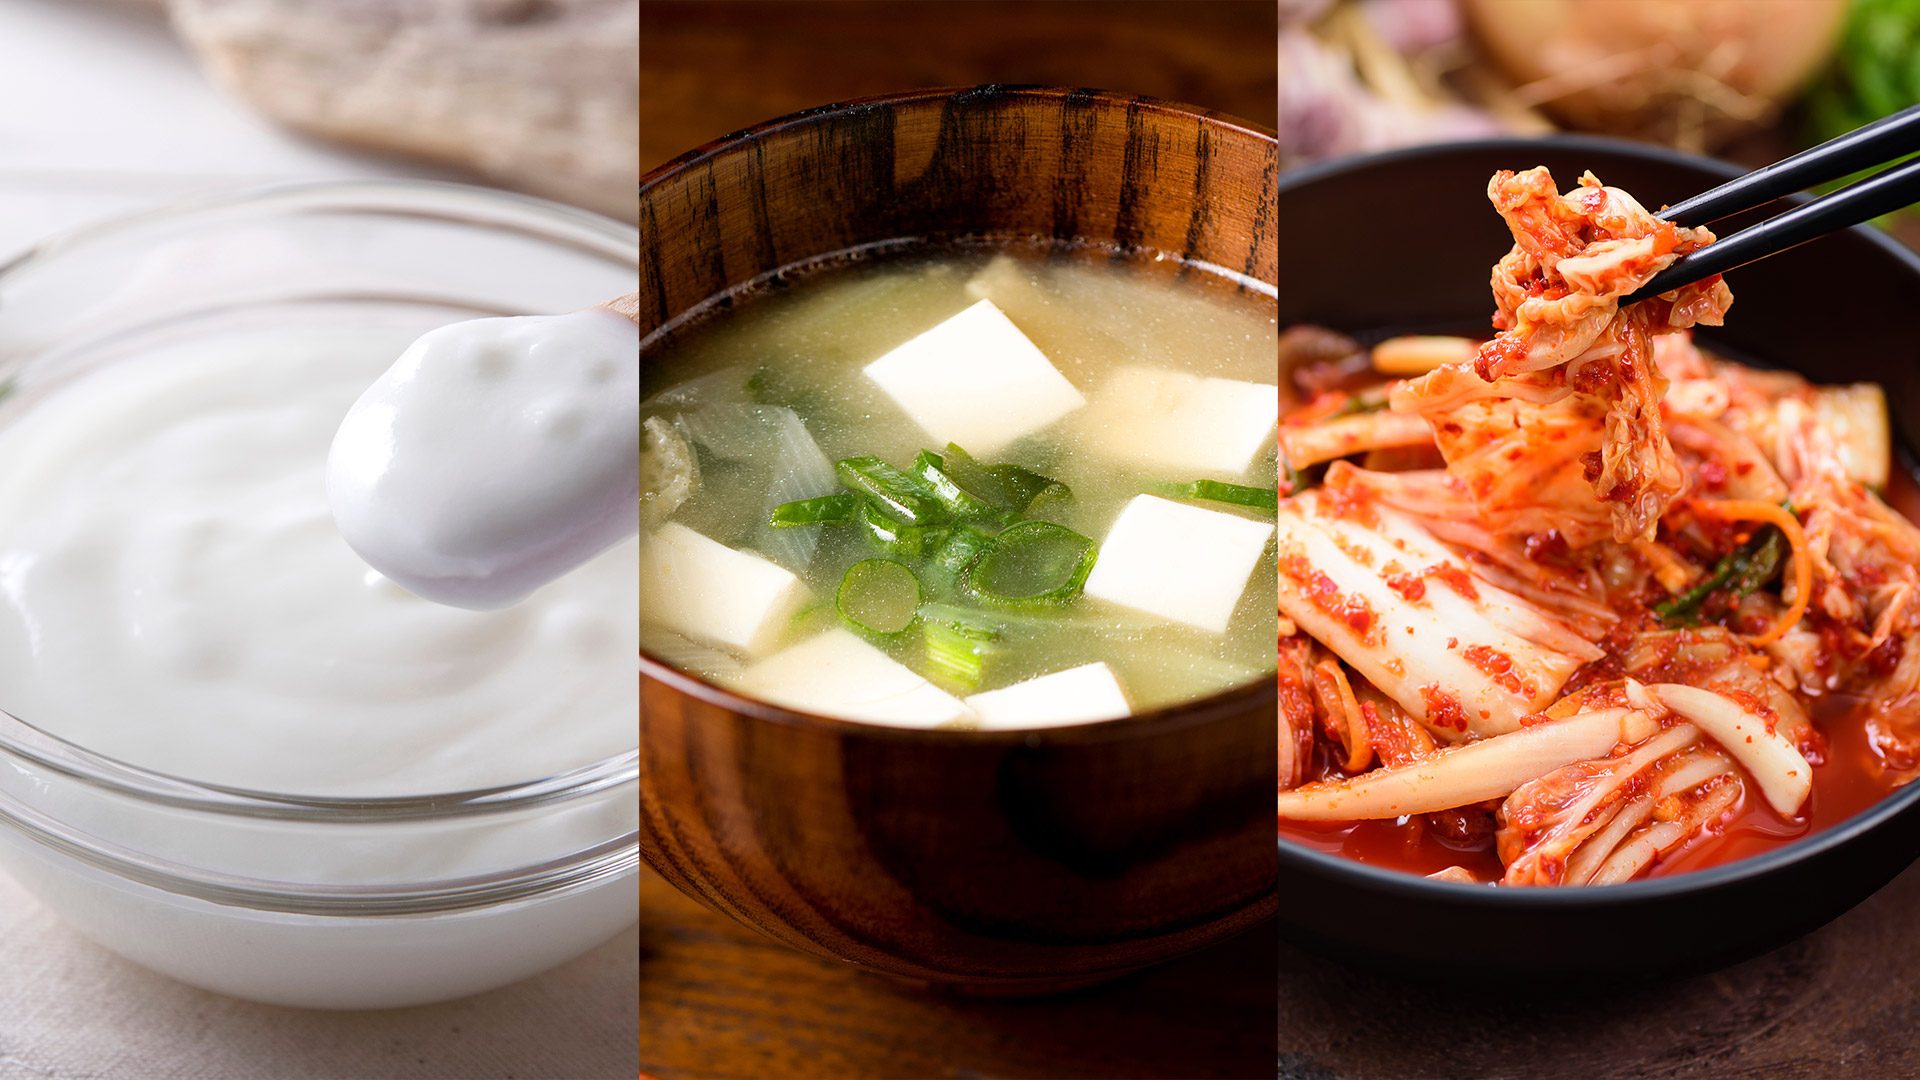 Gut to know! Why probiotics and fermented foods are good for you